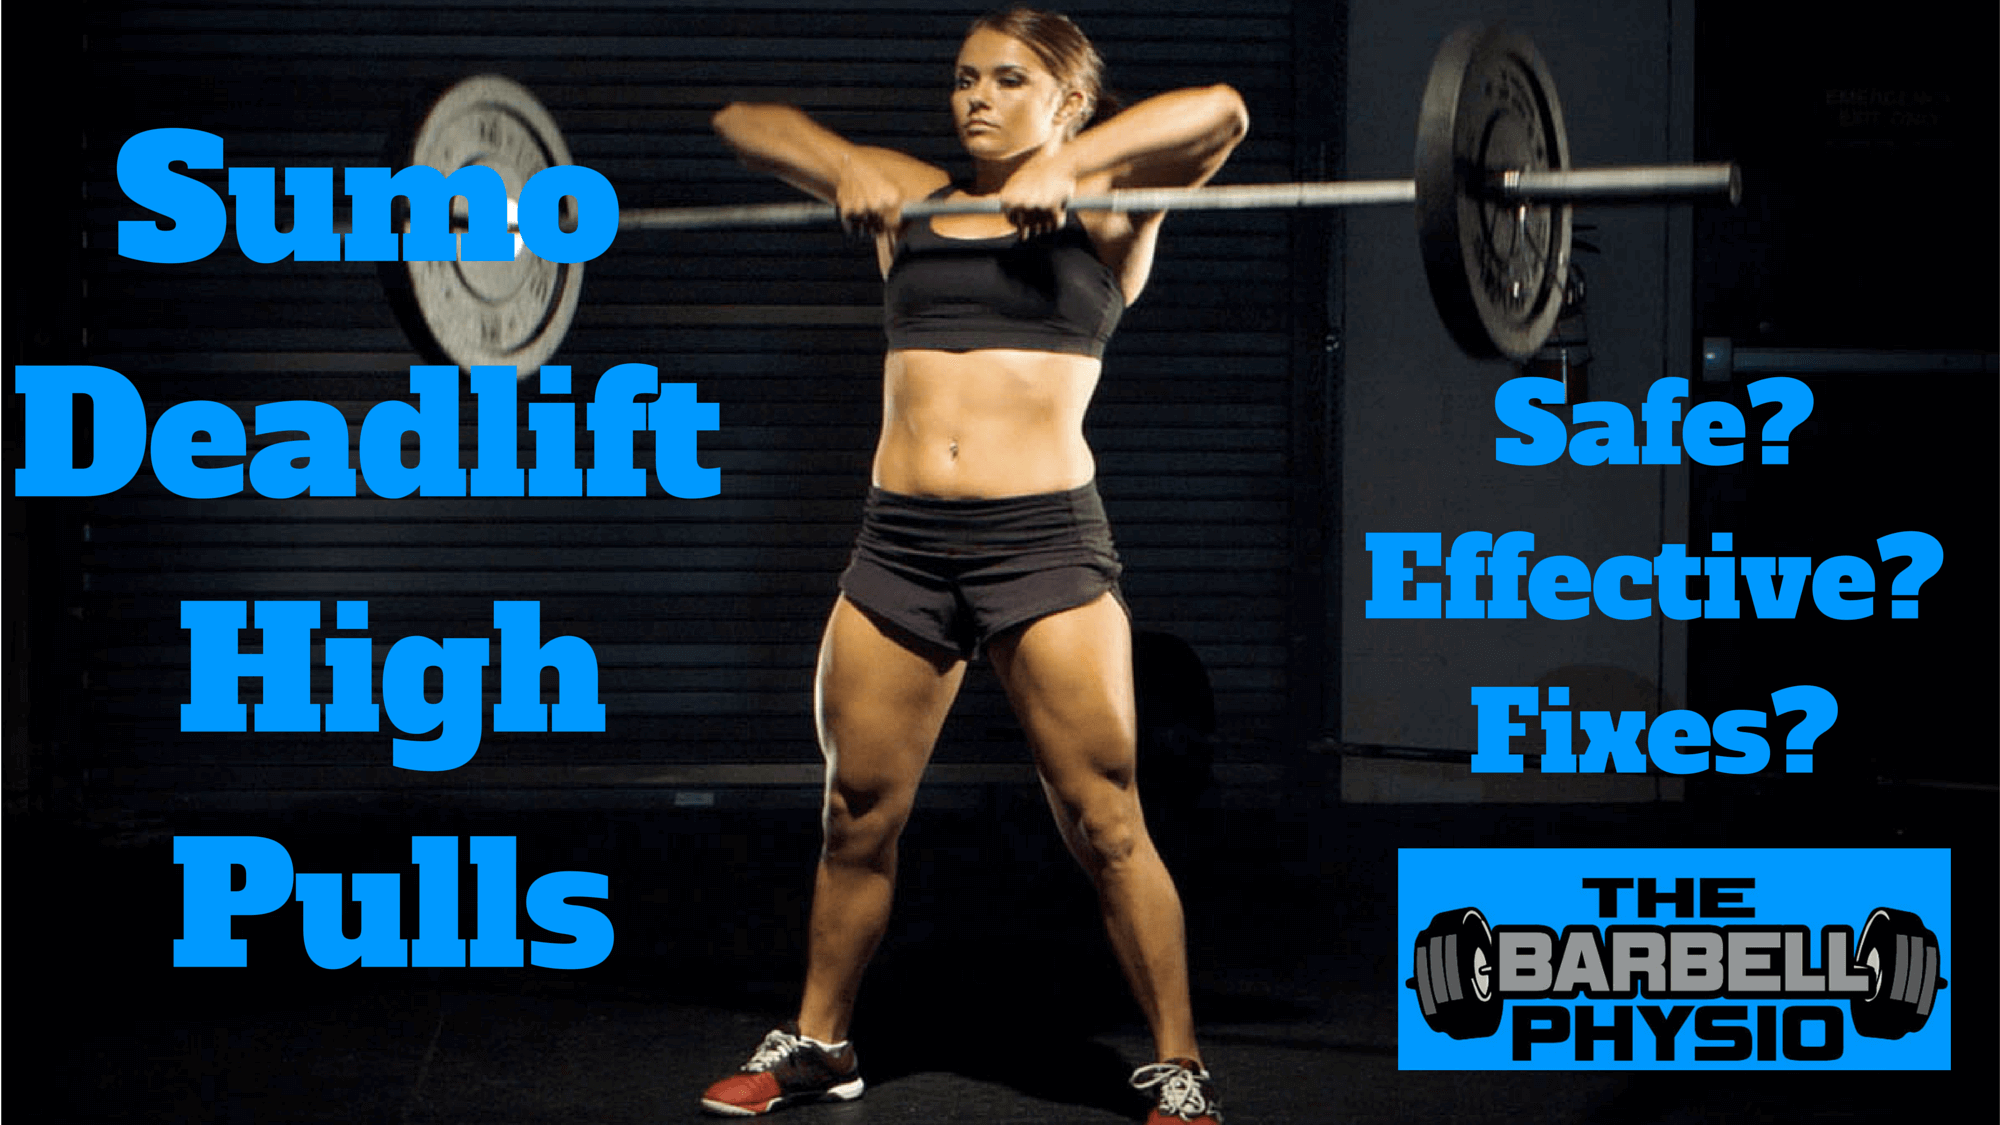 Sumo Deadlift High Pull Safety, Effectiveness, & Fixes